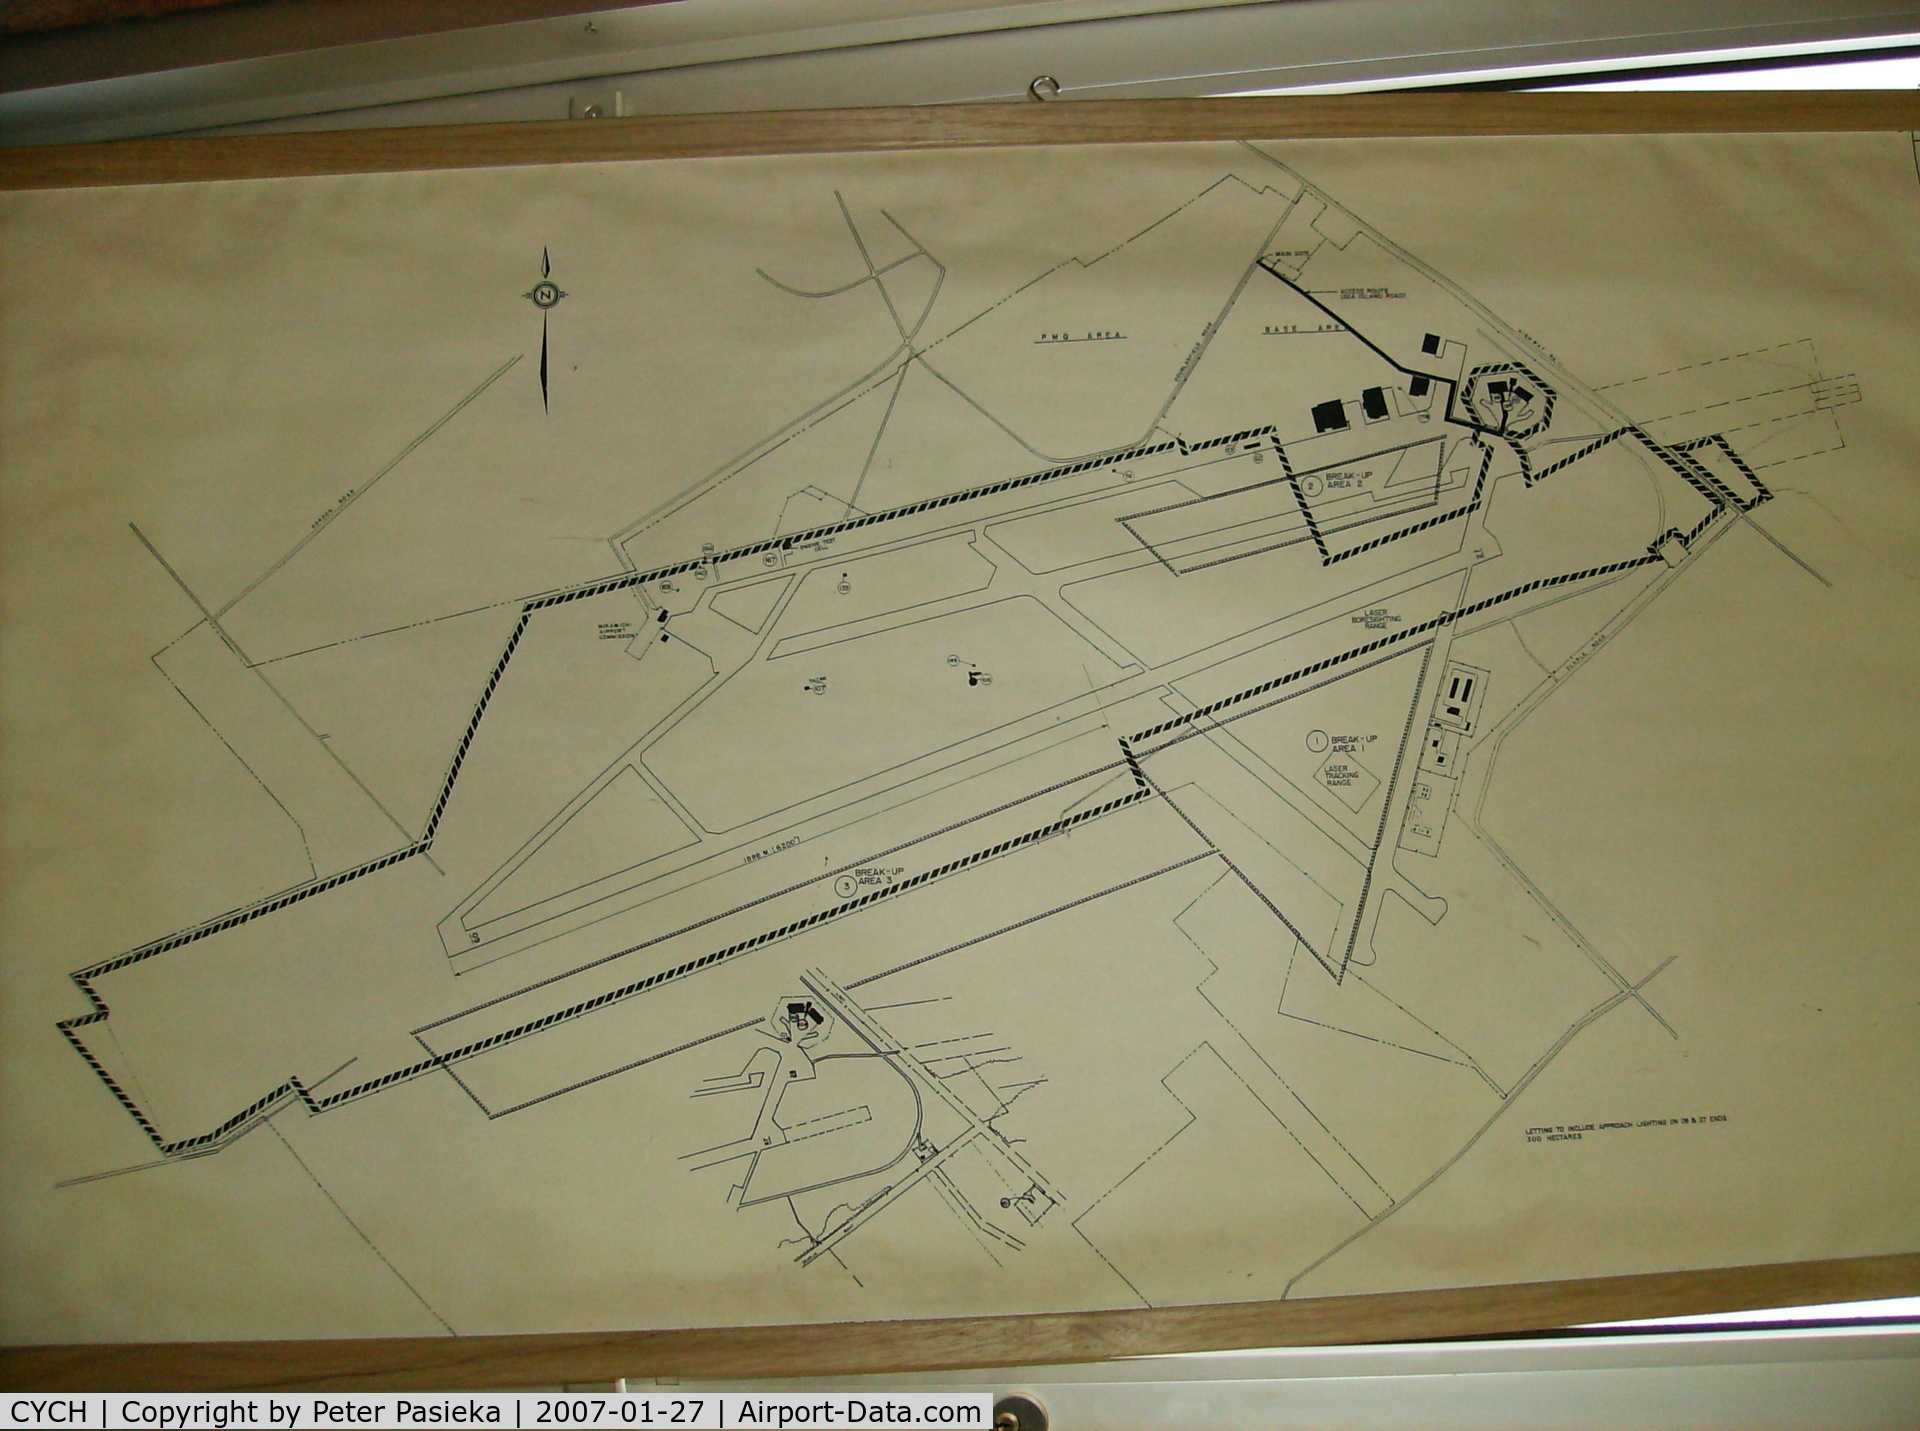 Miramichi Airport, Miramichi, New Brunswick Canada (CYCH) - CAD drawing of the Miramichi Airport. You can see what it used to be and what it is now. It is a former Canadian Air Force base, hence the former size and multiple of runways. 